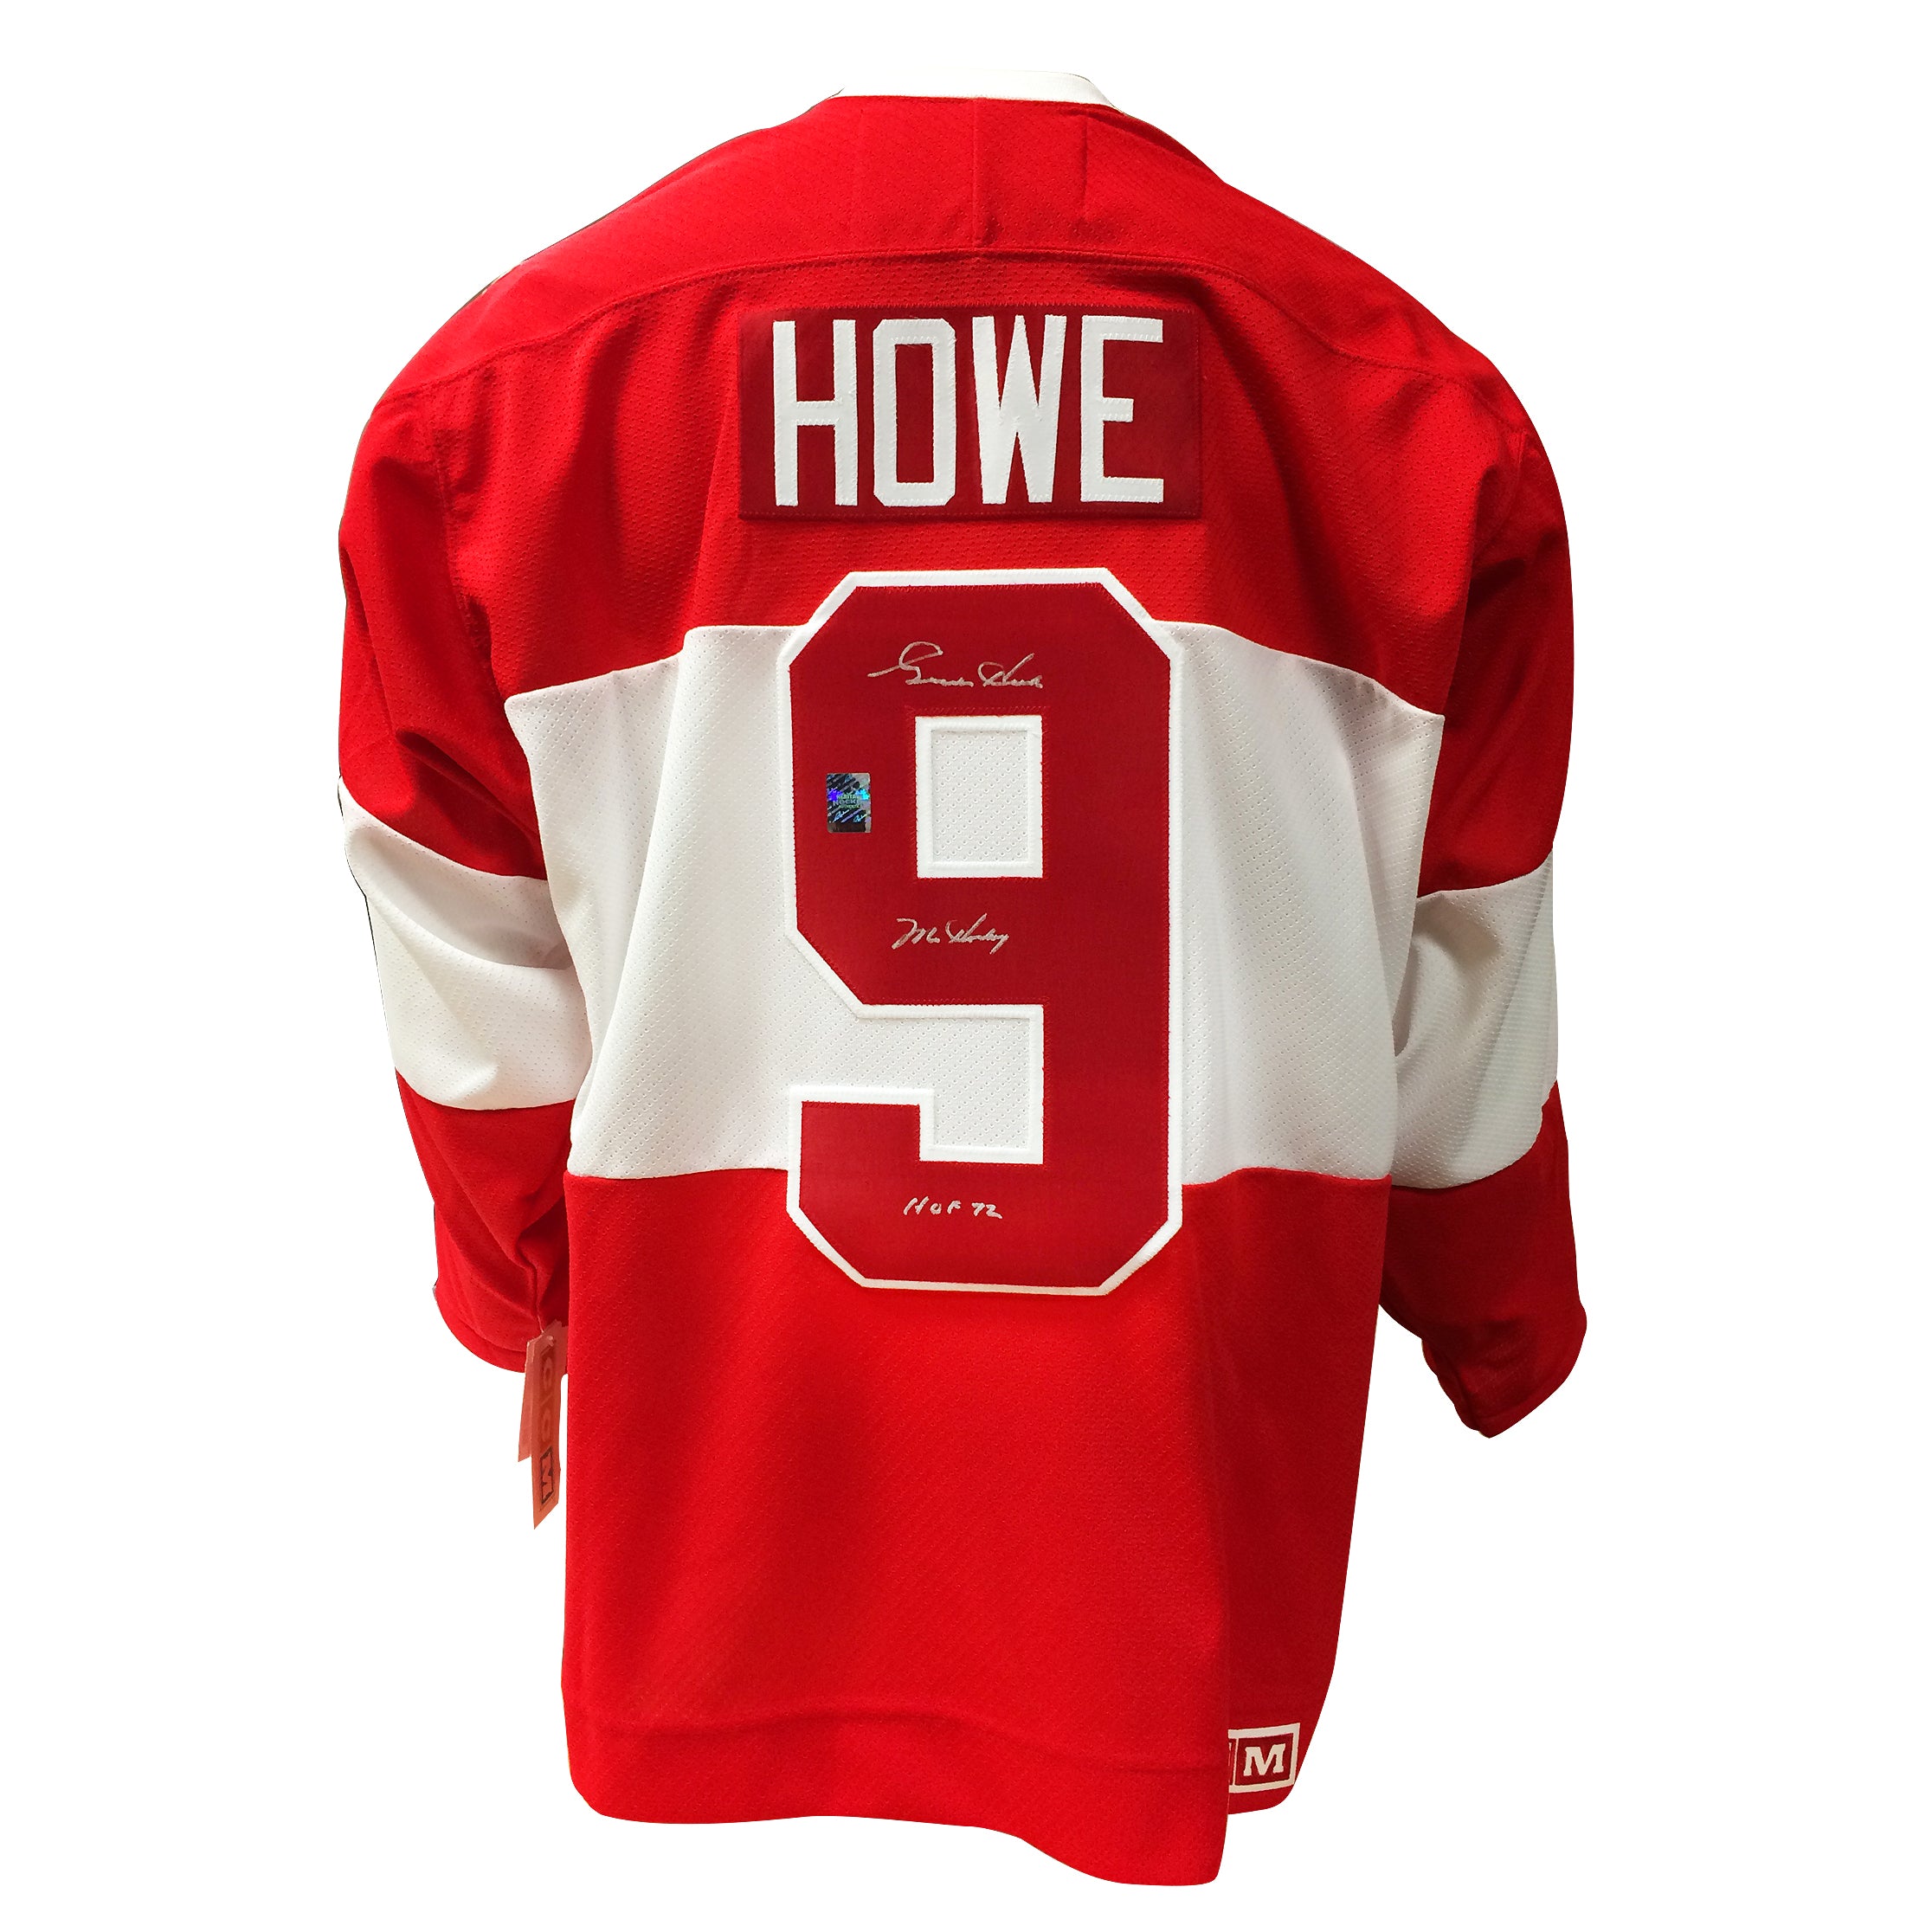 howe signed jersey